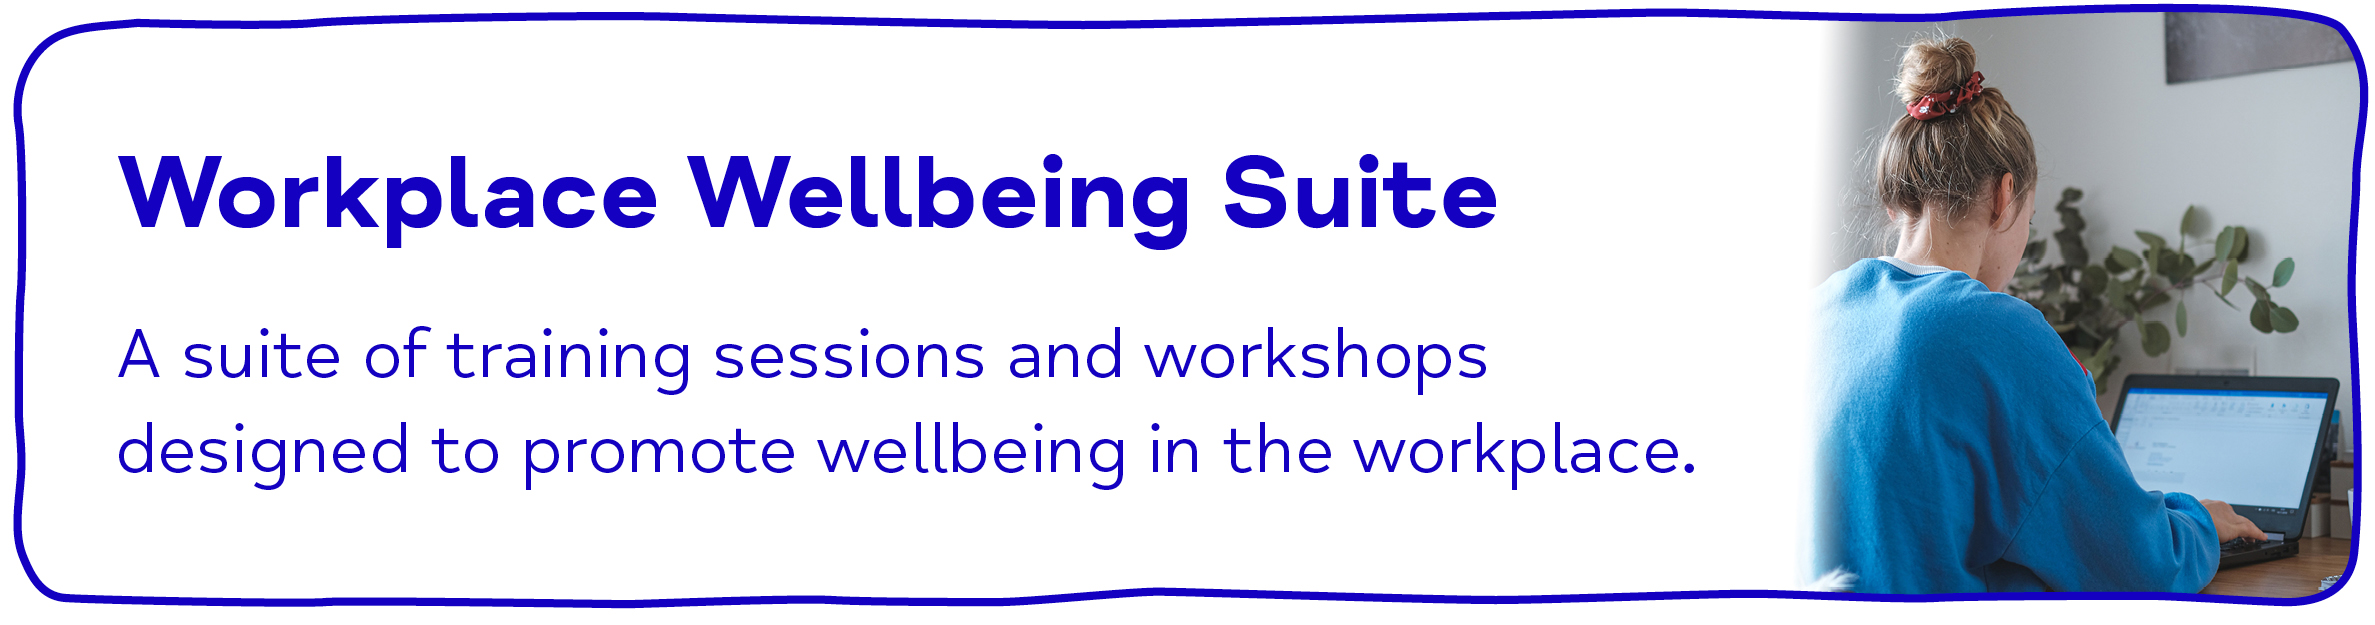 Workplace Wellbeing Suite. A suite of training sessions and workshops designed to promote wellbeing in the workplace.